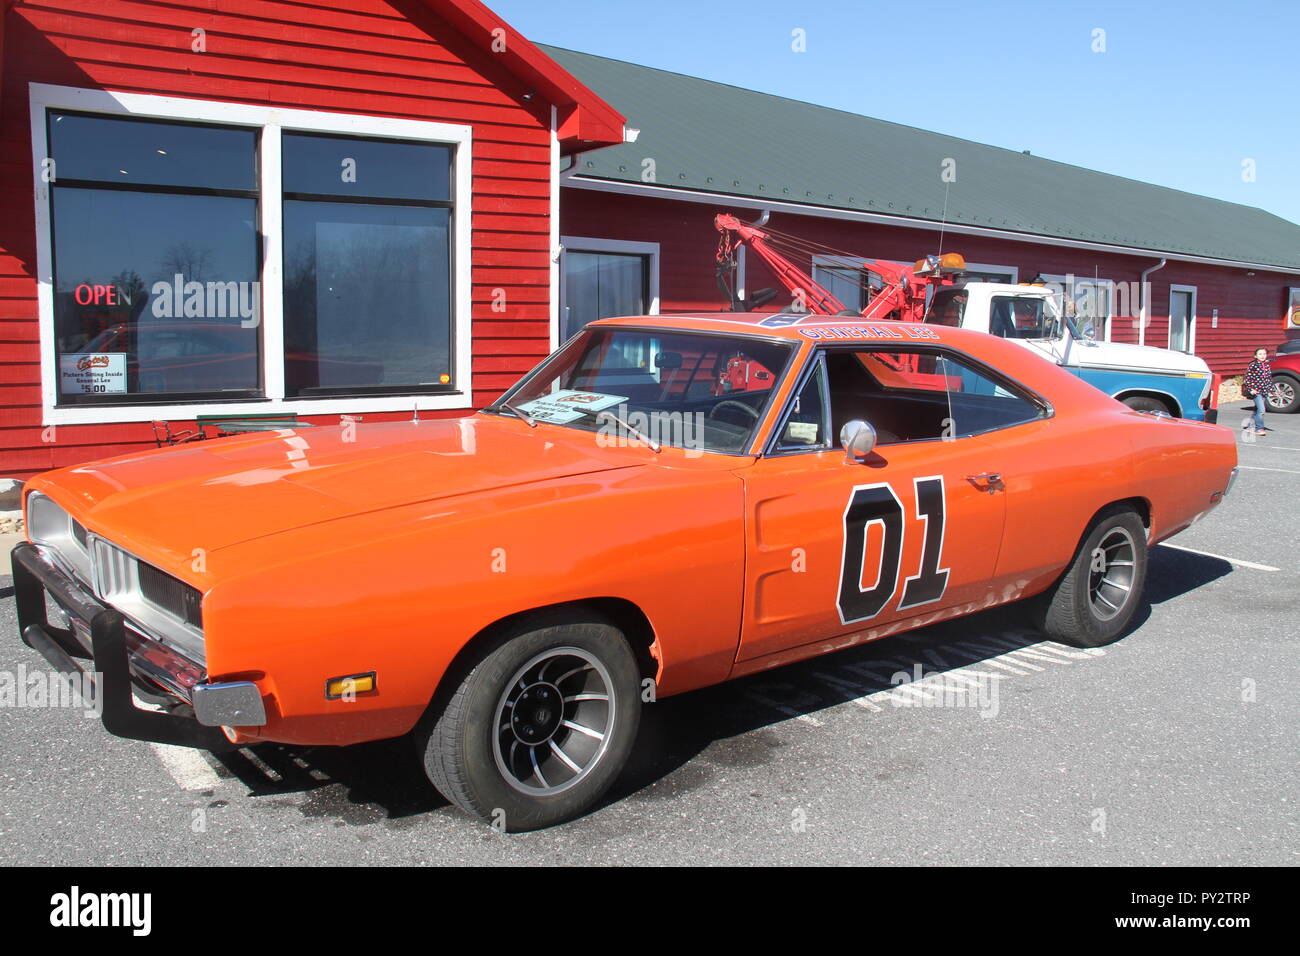 'The General Lee' Dodge Charger from the television series 'The Dukes of Hazzard', displayed at the Dukes of Hazzard museum in Luray, VA, USA Stock Photo